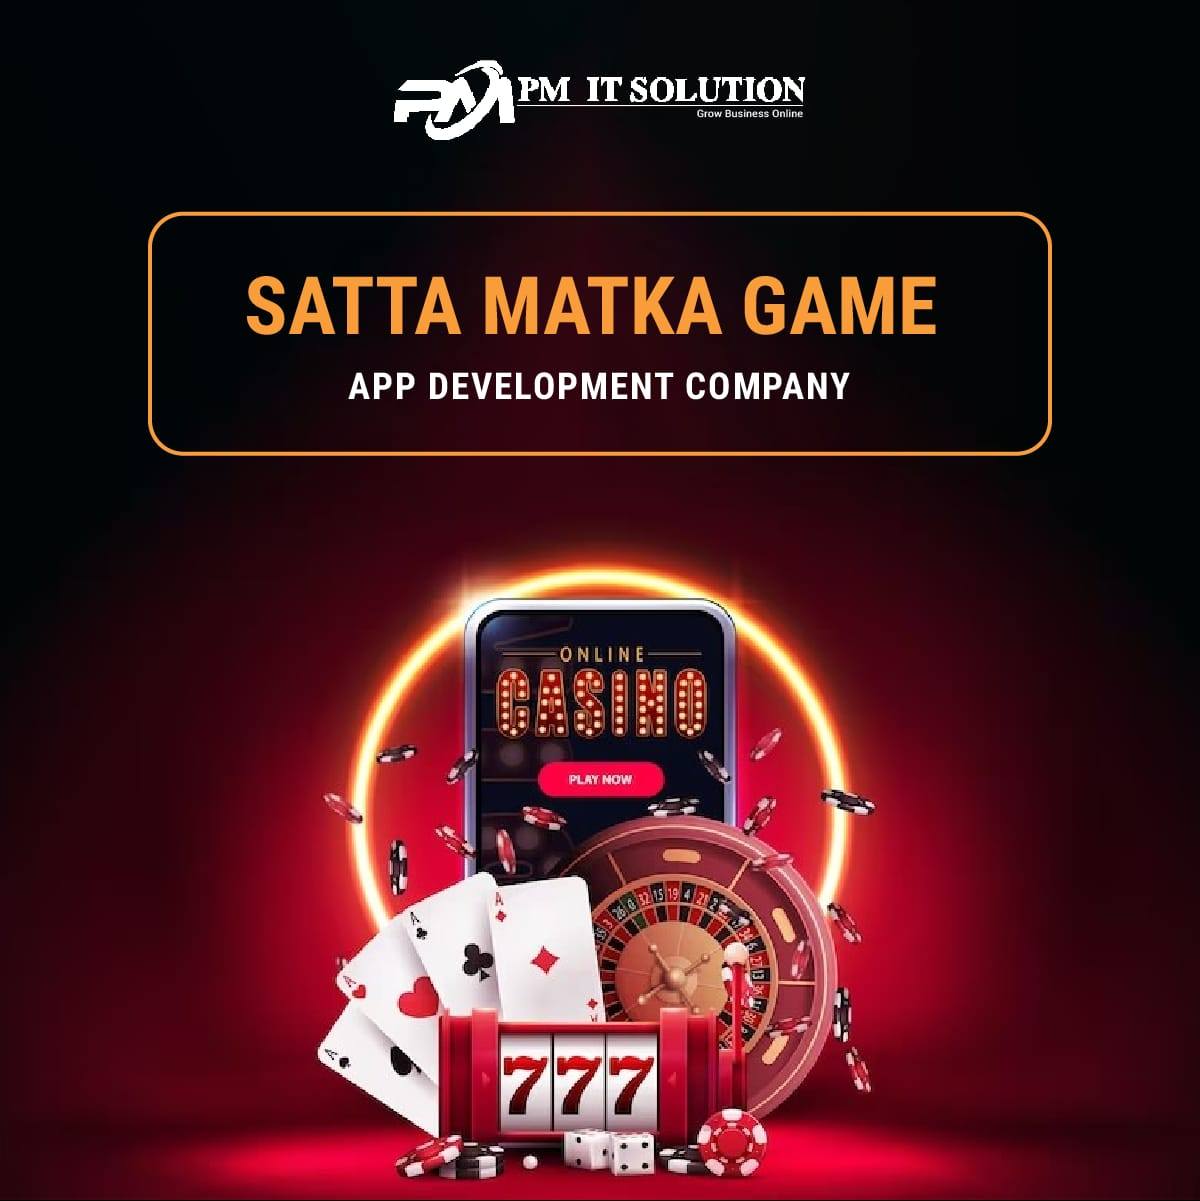 Bringing Matka Games to Life With Expert Develop